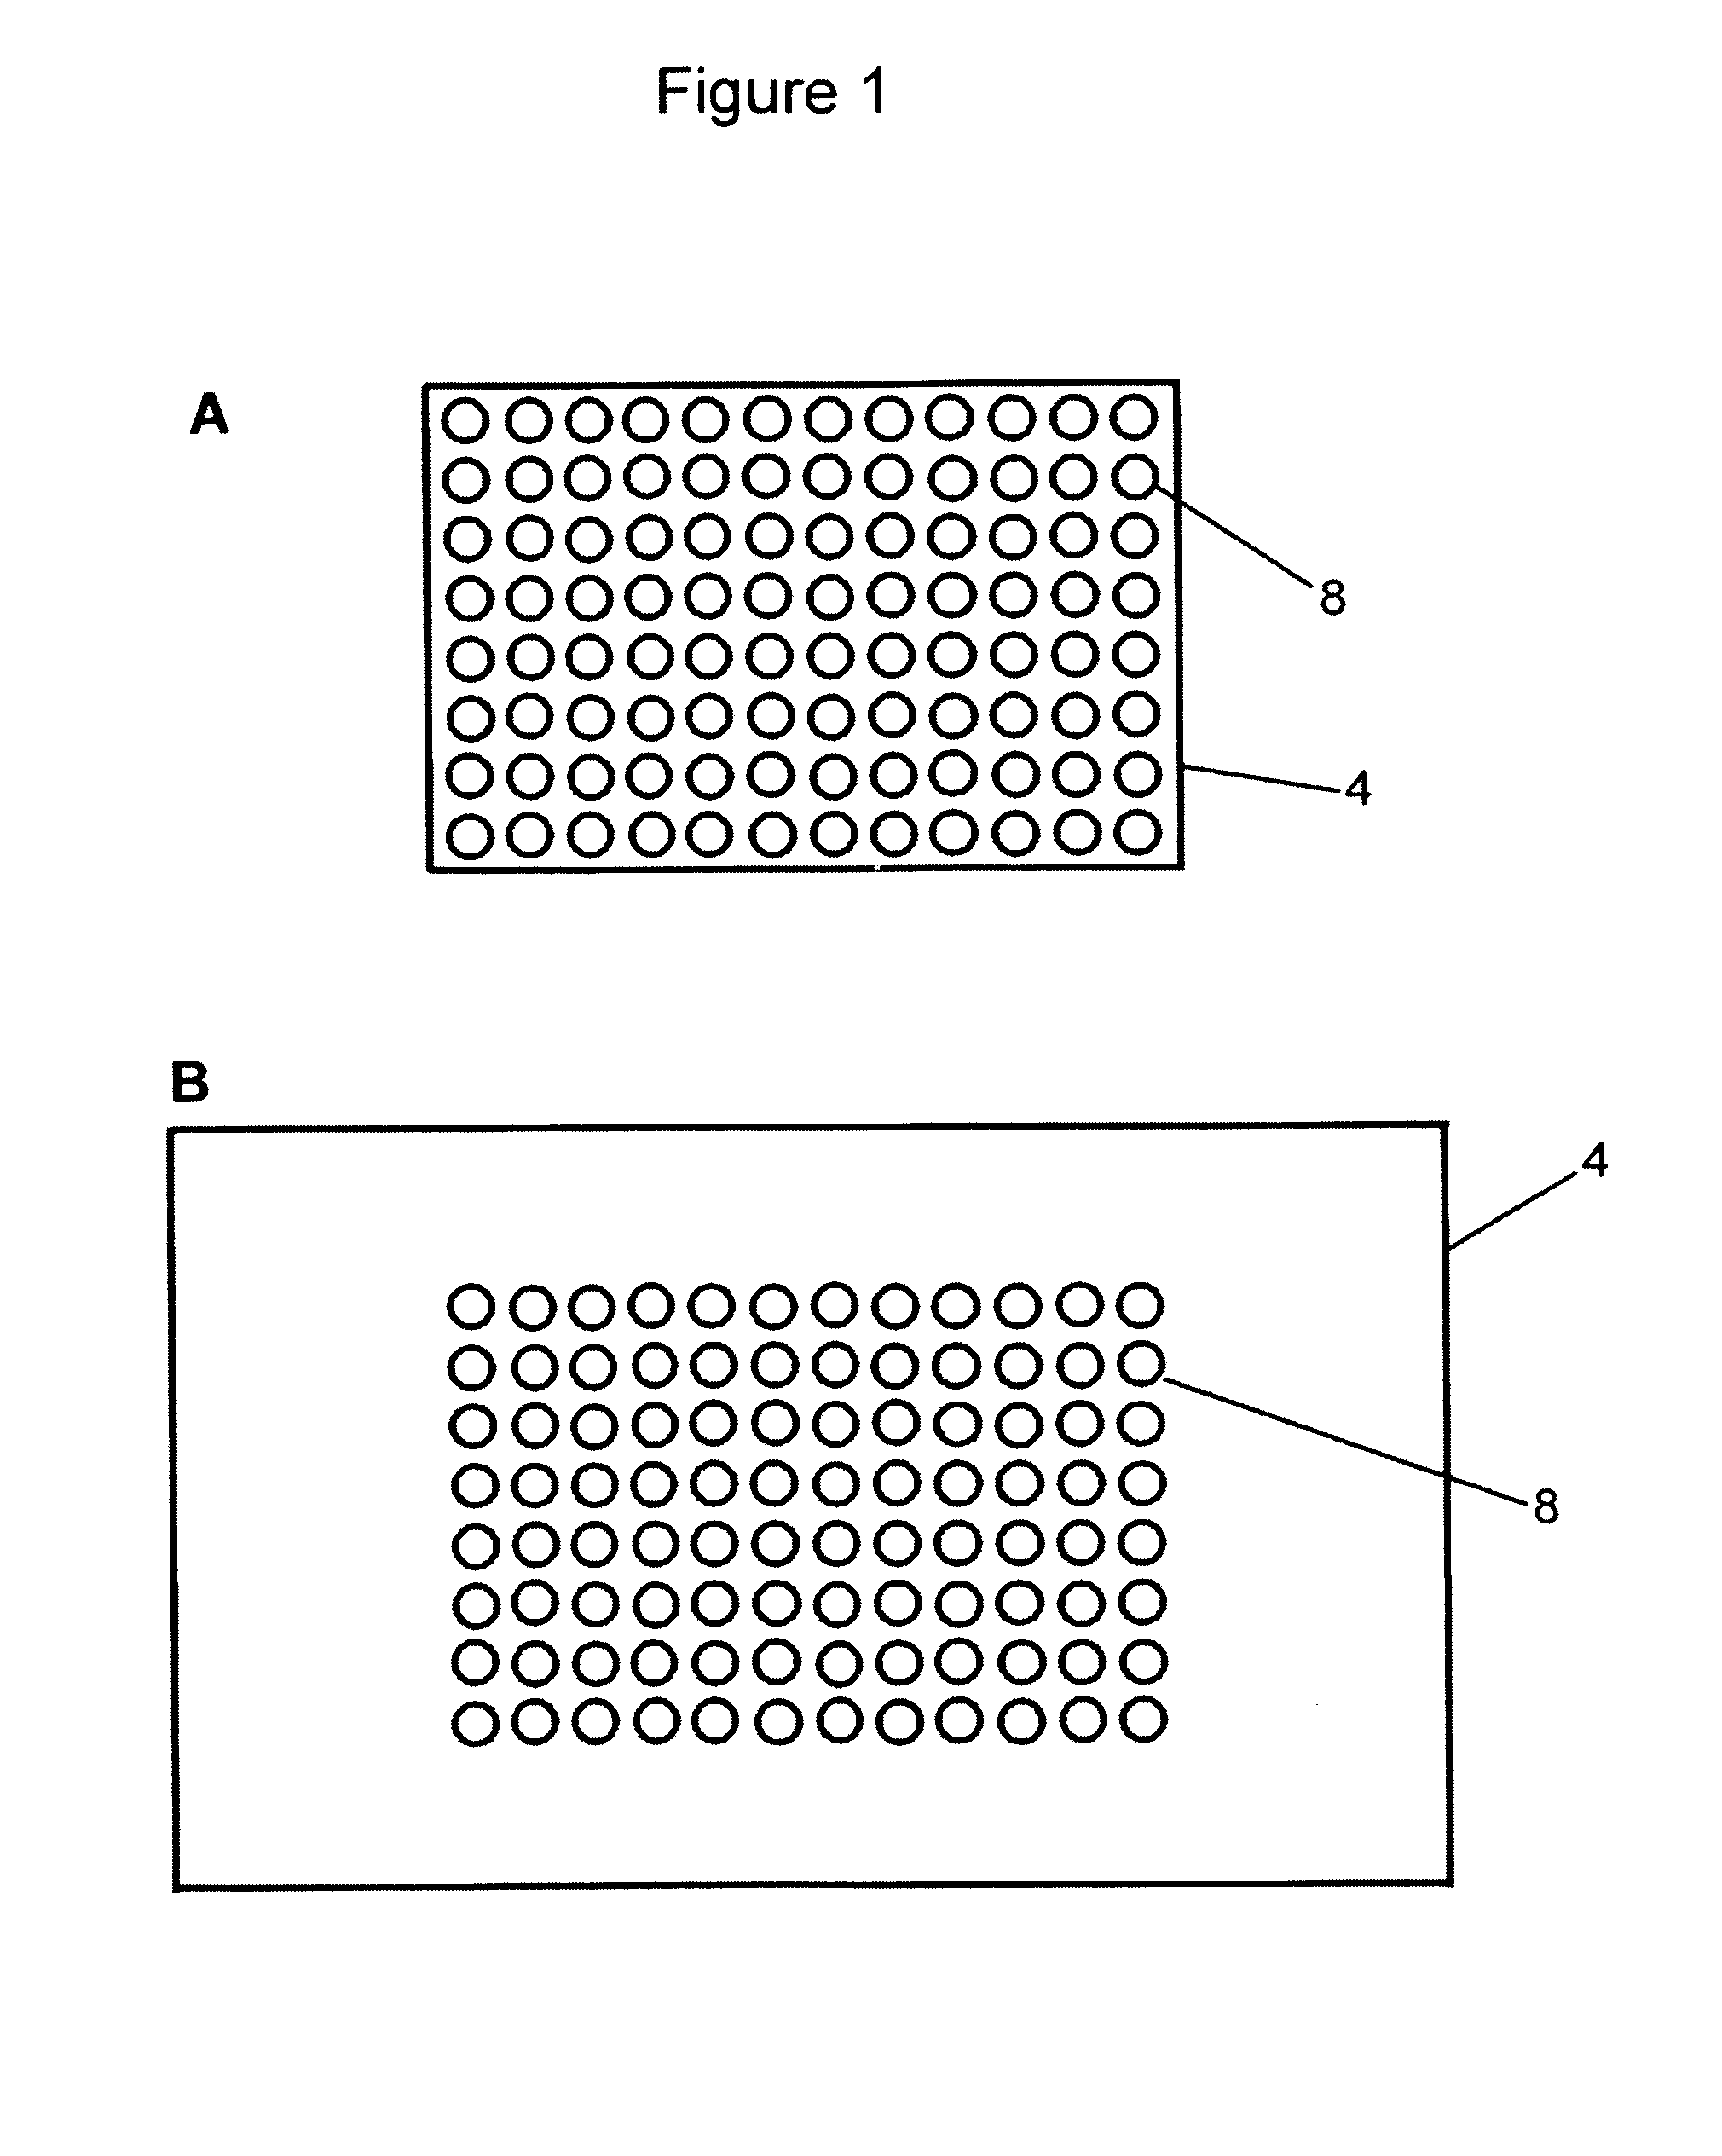 Miniaturized cell array methods and apparatus for cell-based screening